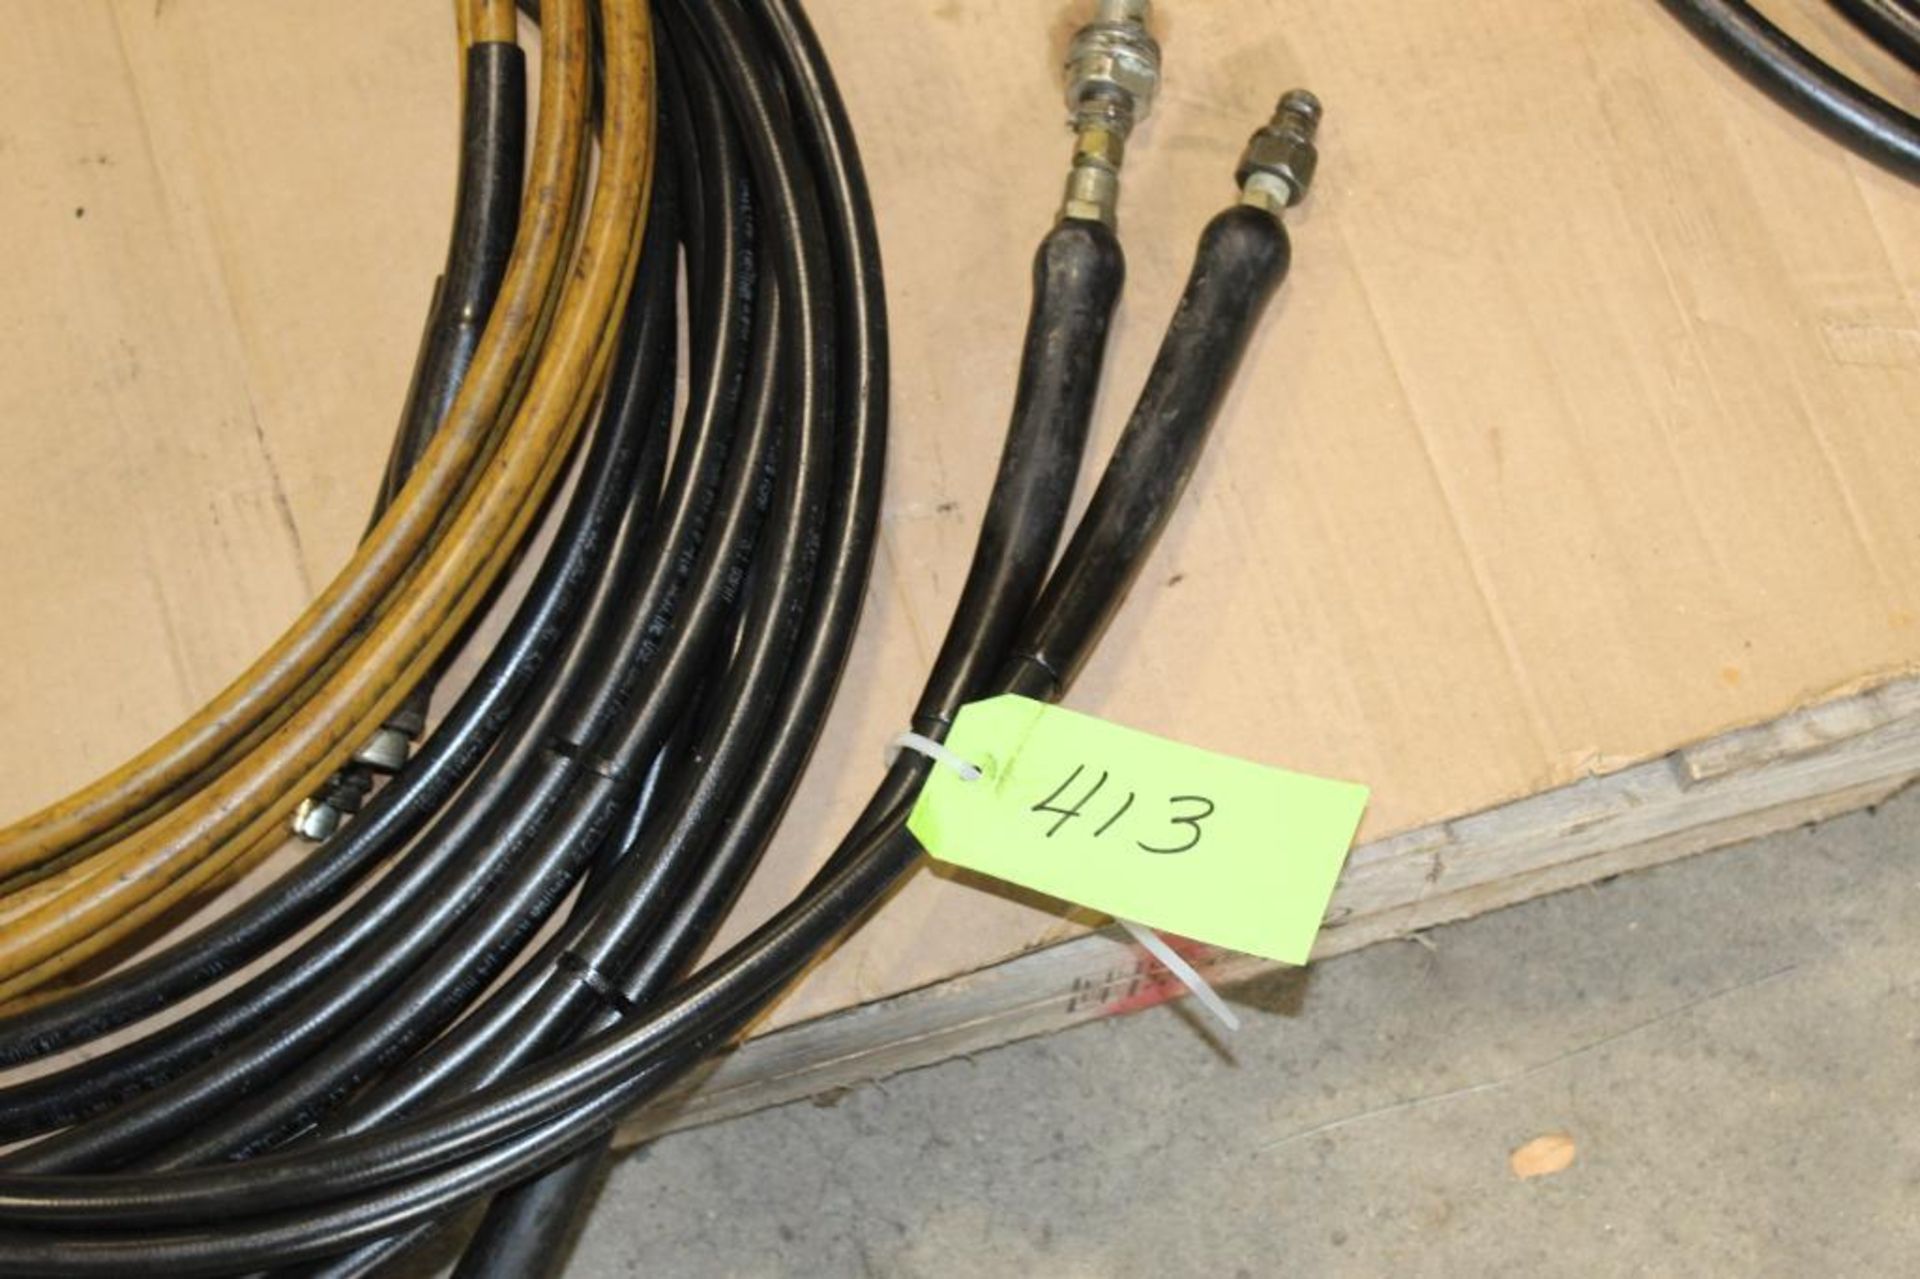 Lot of (6) Assorted Hoses and (6) Handles For Hydraulic Pumps - Image 2 of 5